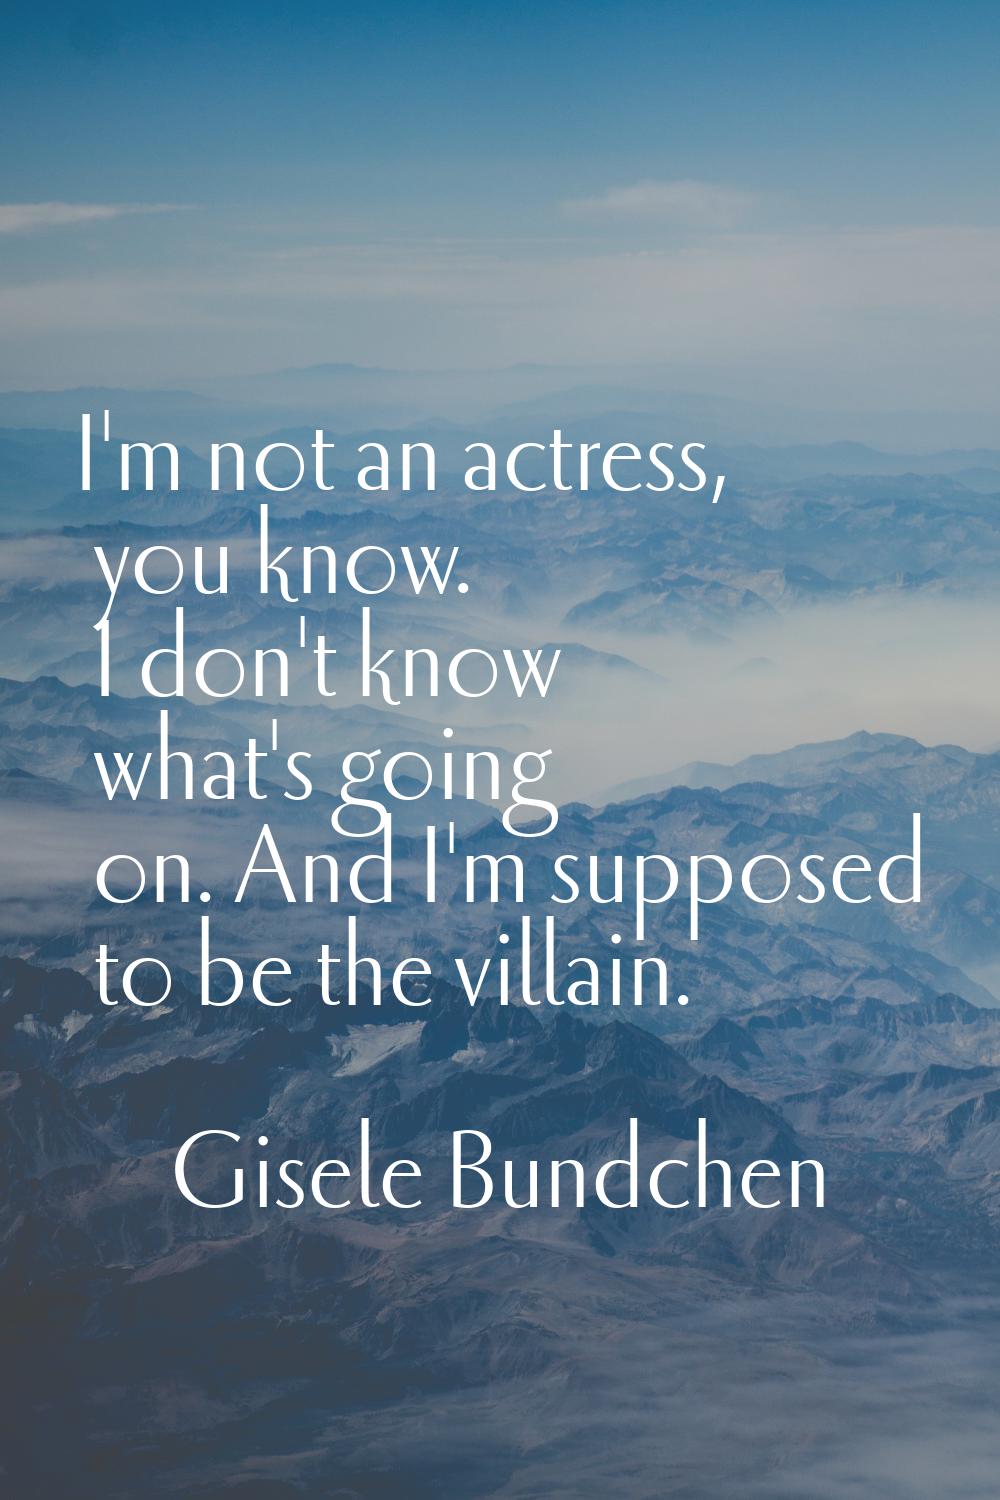 I'm not an actress, you know. I don't know what's going on. And I'm supposed to be the villain.